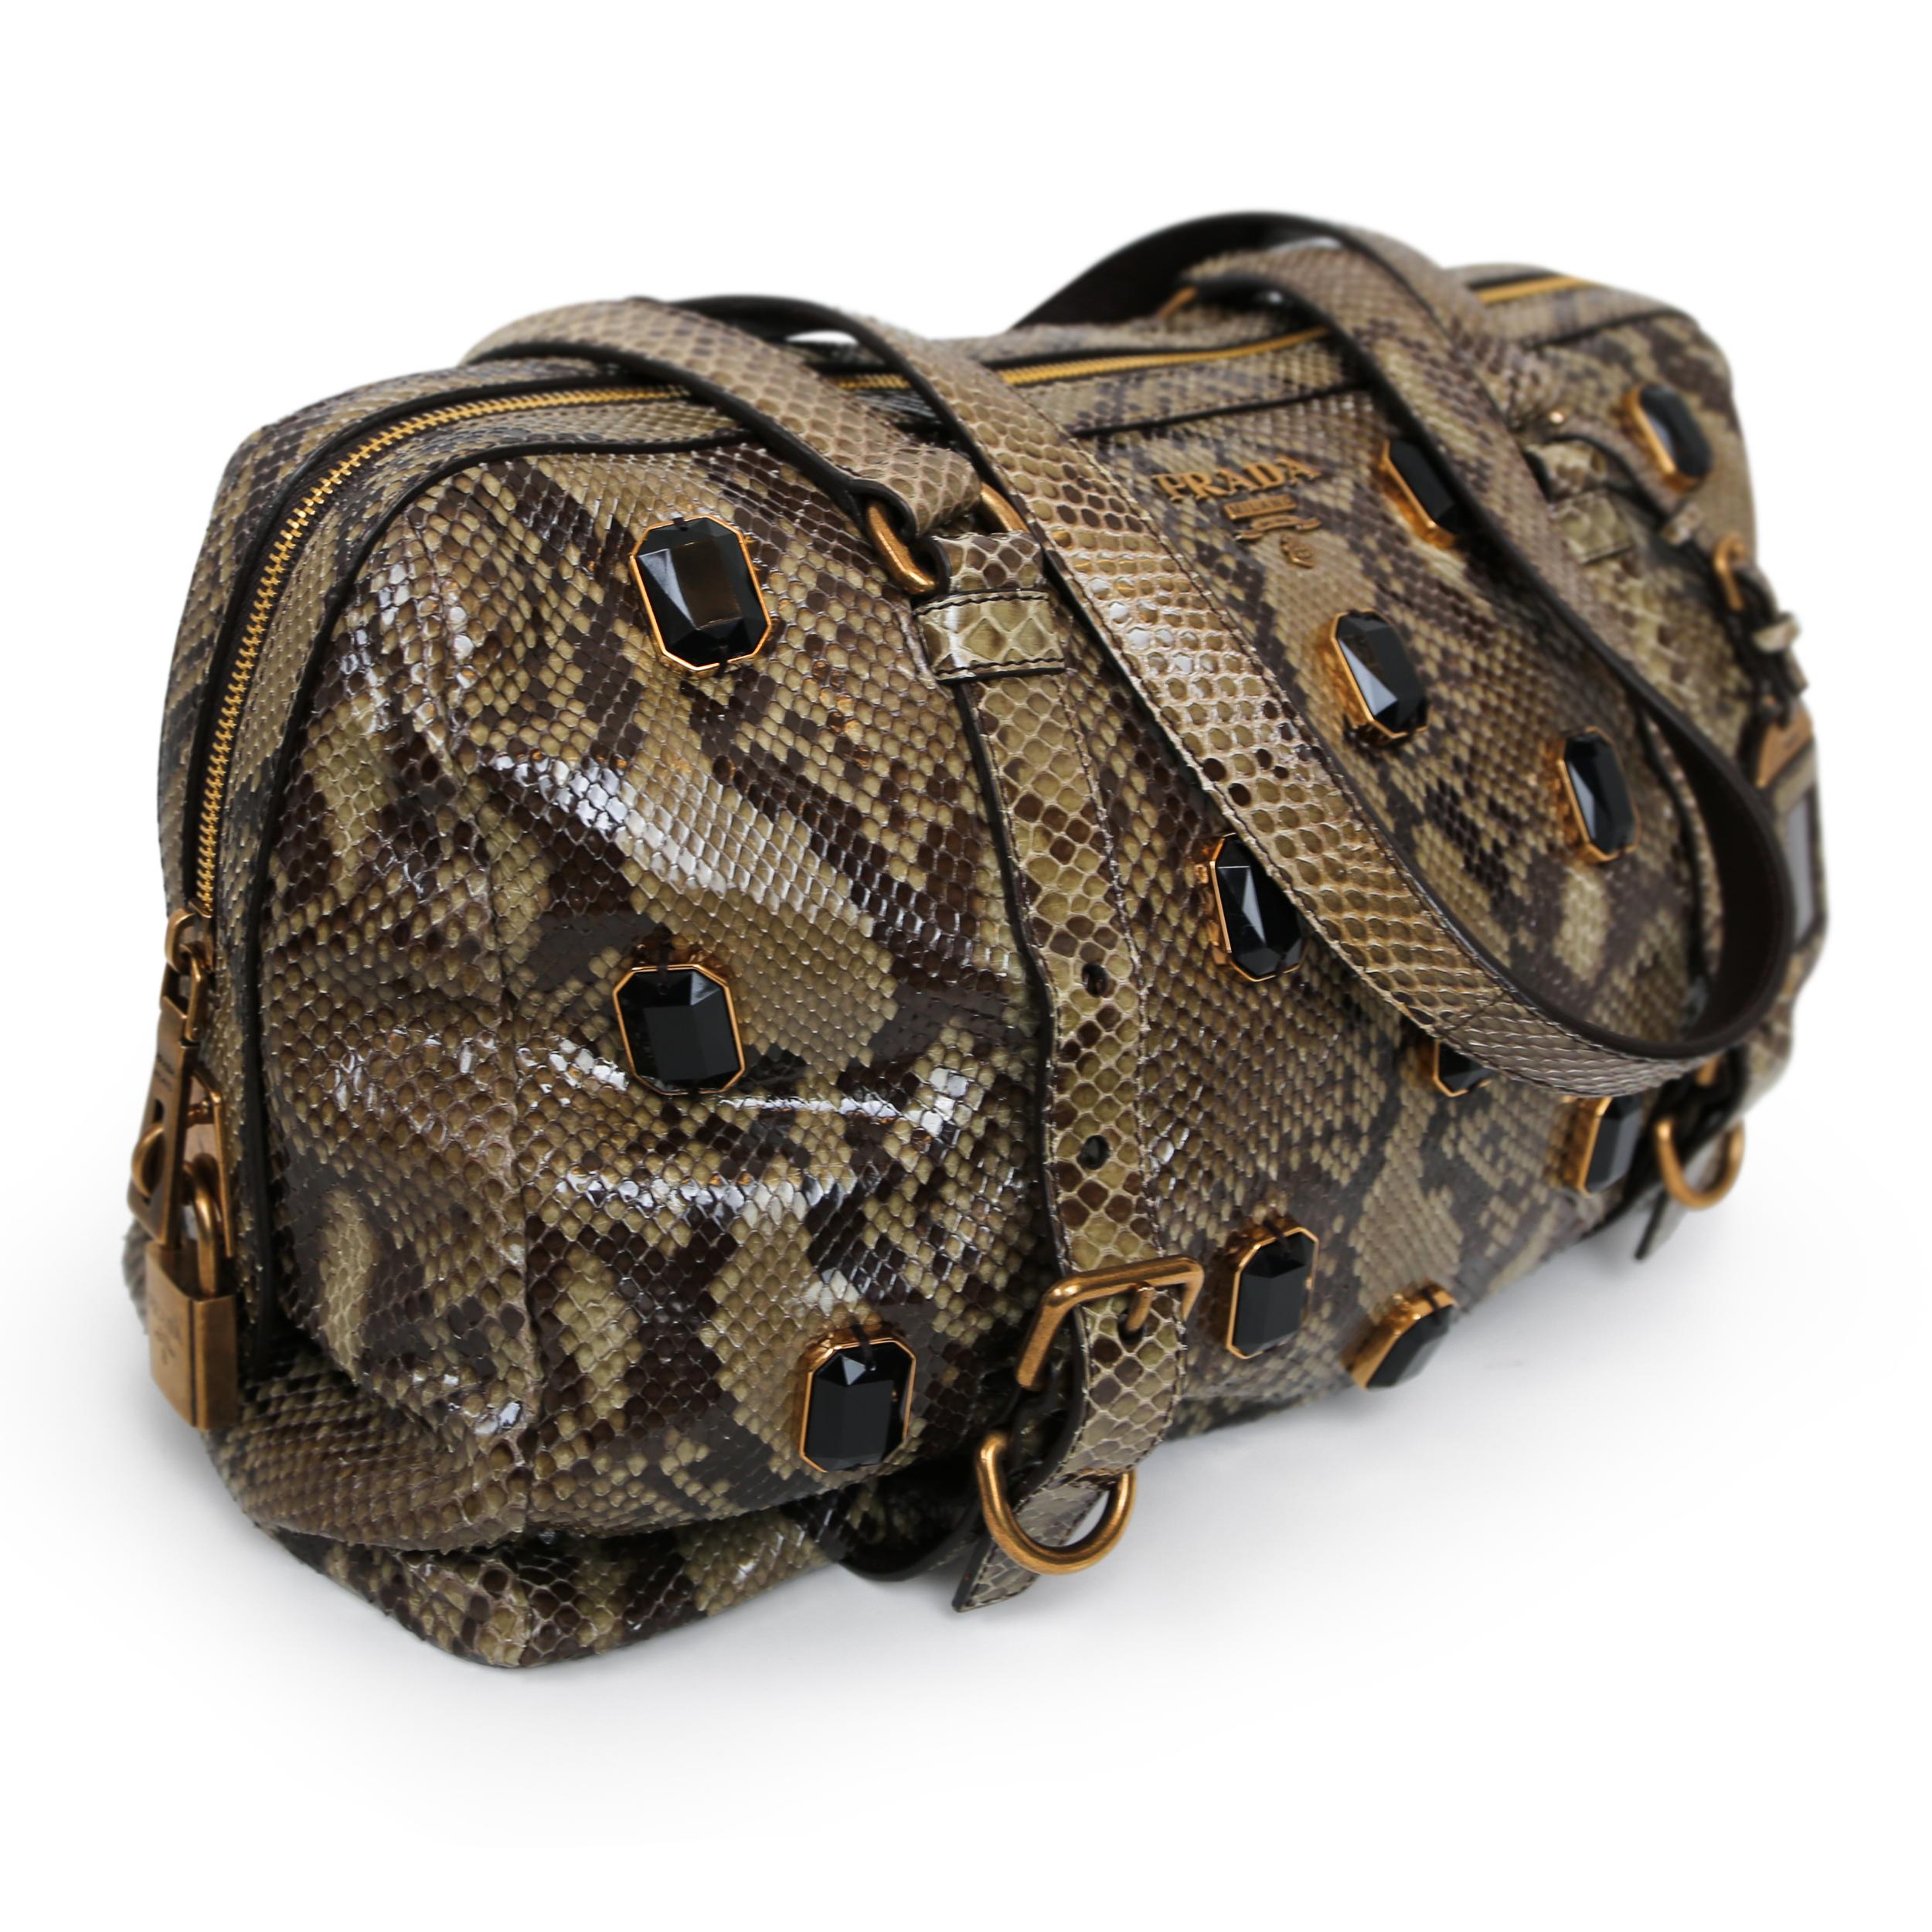 This exquisite Prada bag boasts luxurious python leather and gold hardware. The jewelled padlock and embellished beads add a touch of glamour to this practical and versatile shoulder handbag. Lined with leather and featuring a zipper pocket, it's